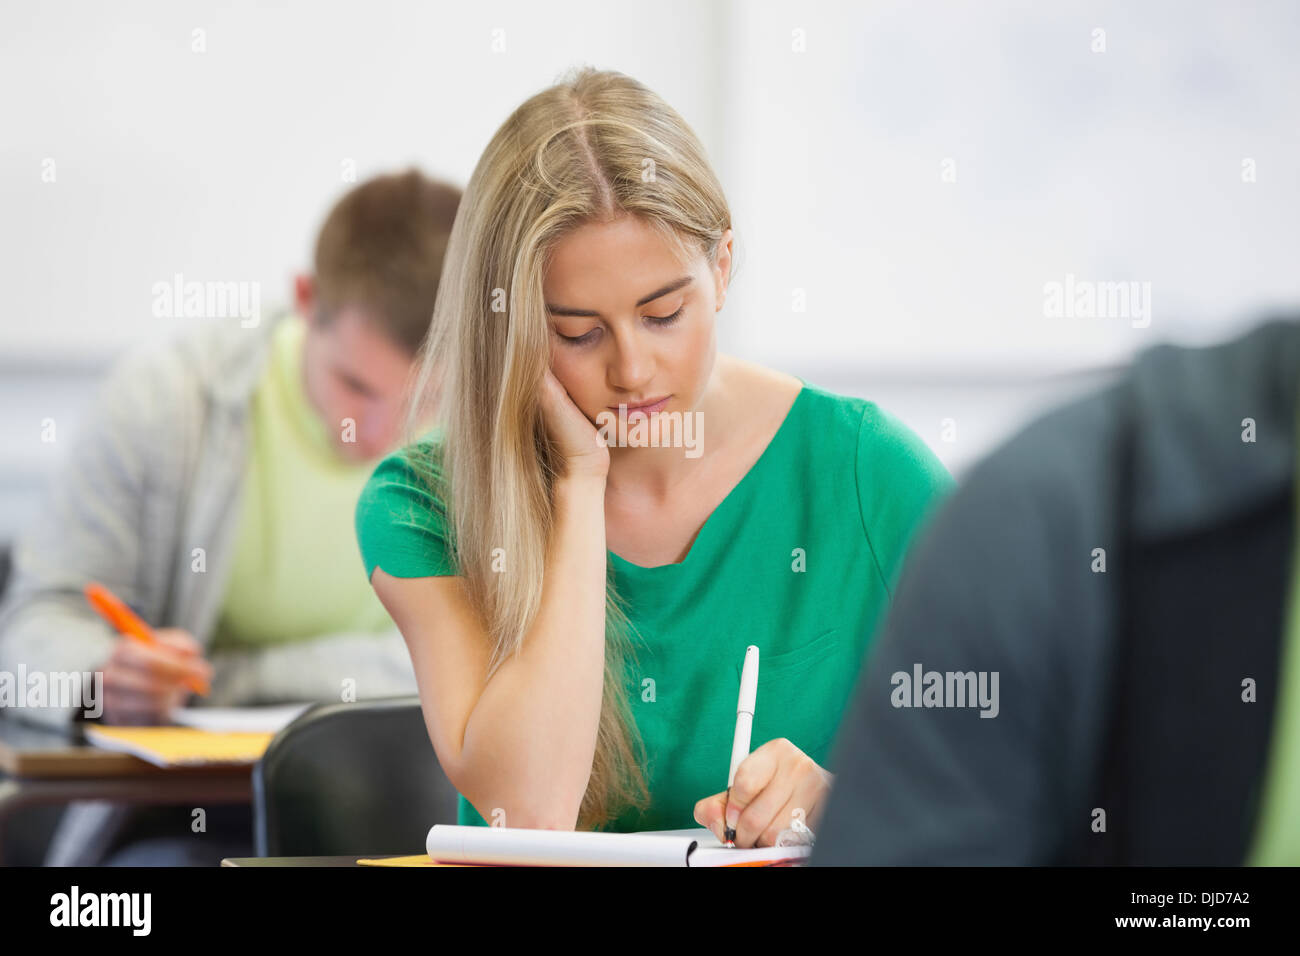 Pretty blonde student taking notes in class Stock Photo